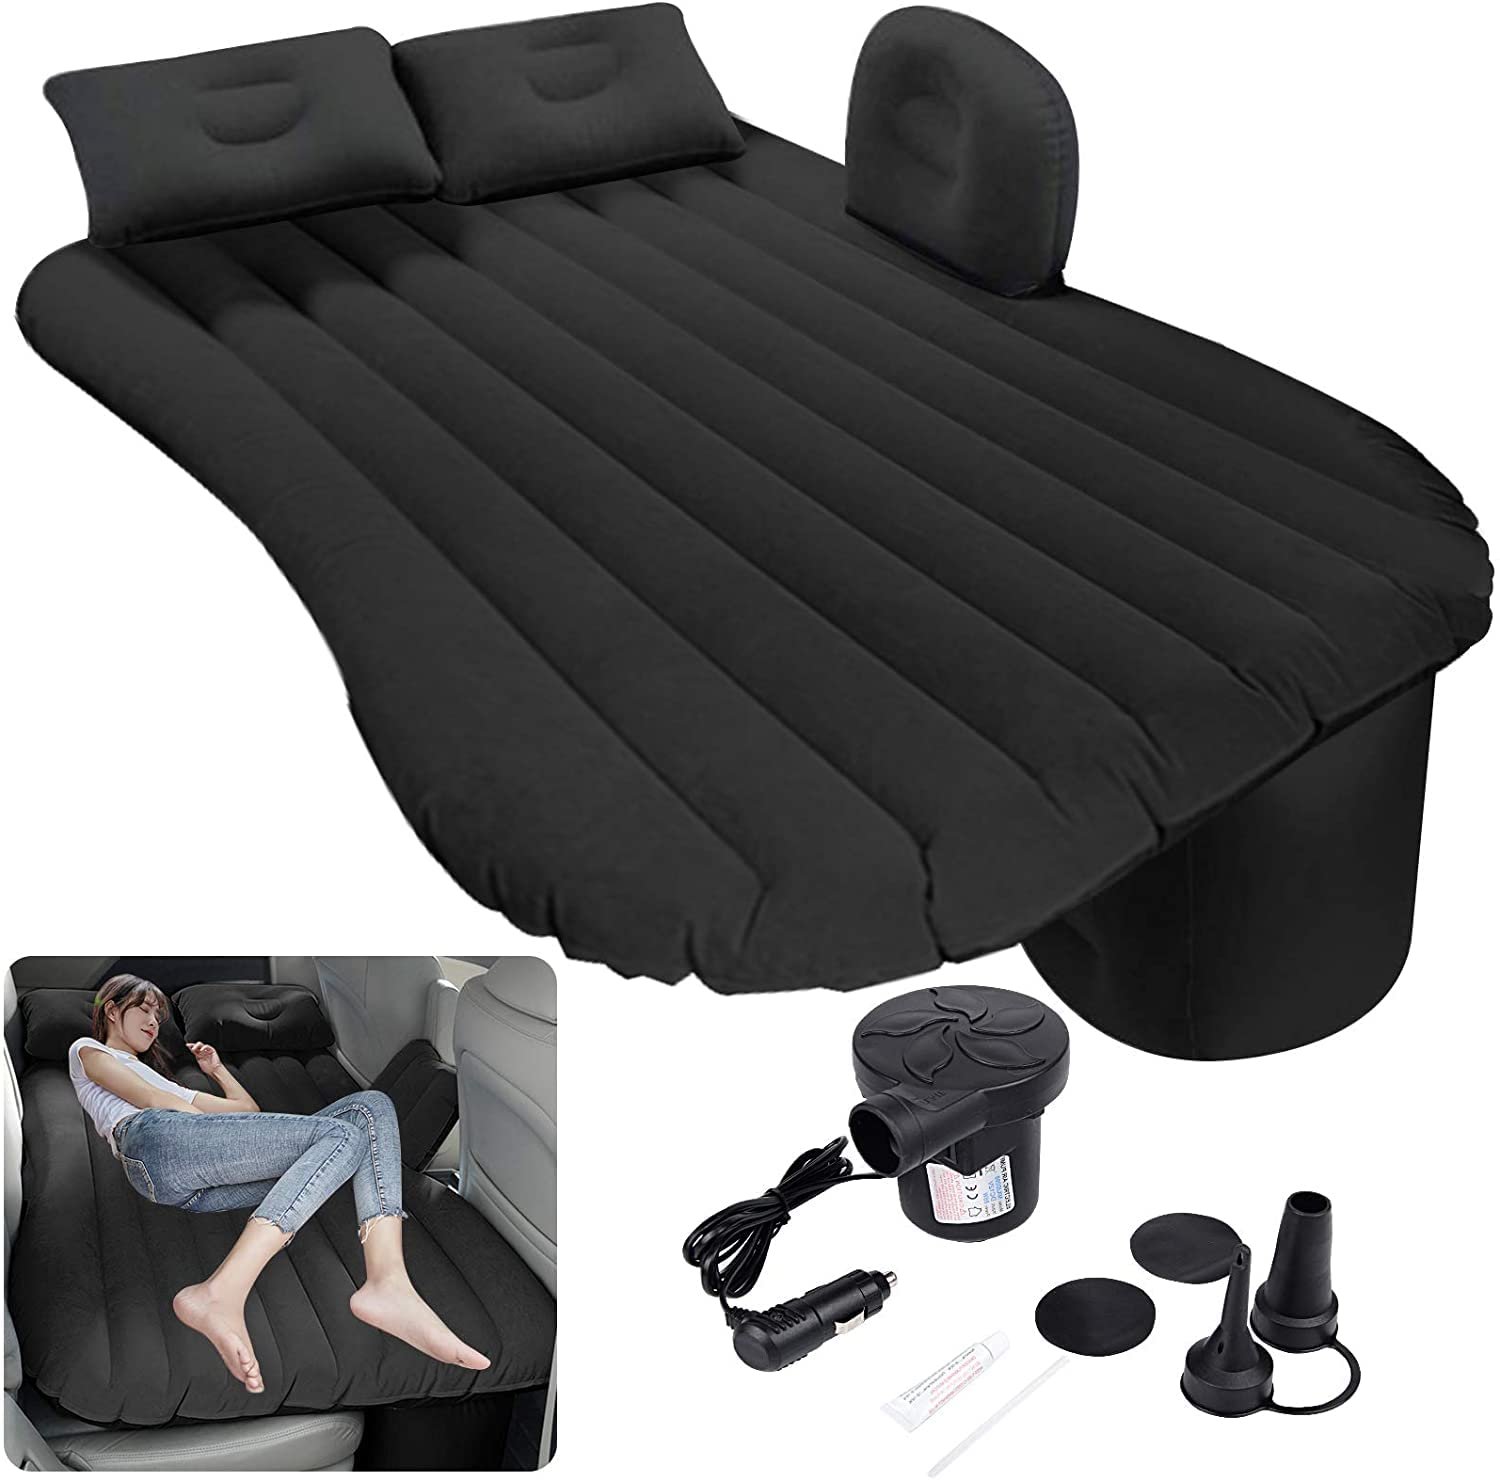 Car Bed Mattress Universal Car Back Seat Travel Air Inflation with Two Pillows, Air Pump and Repair Kit (Black) Image 